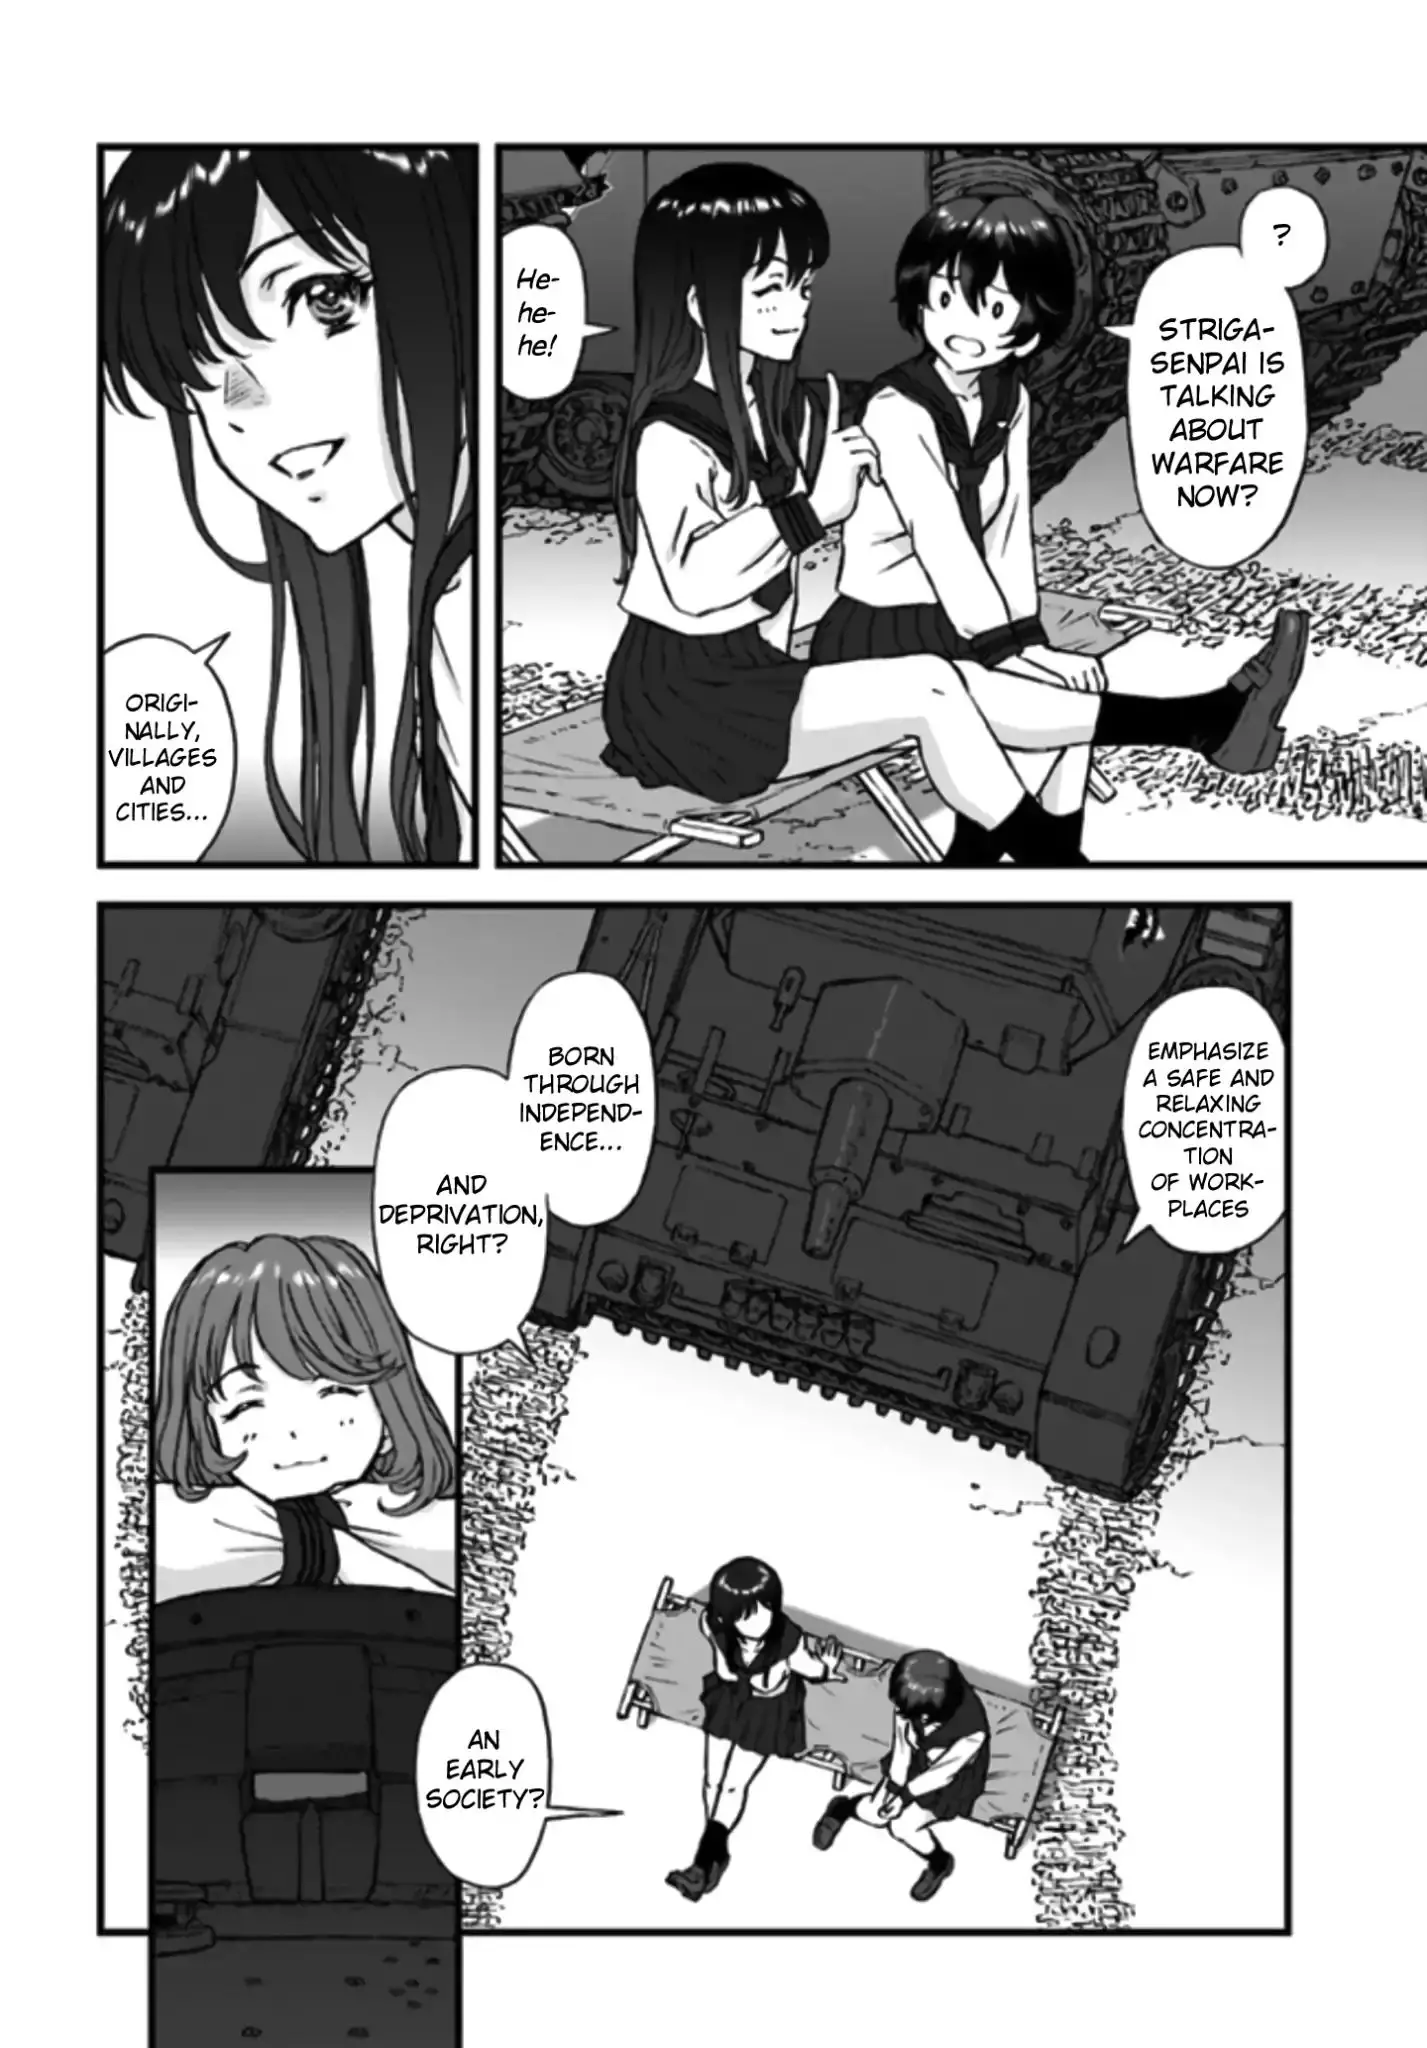 Girls Und Panzer - The Fir Tree And The Iron-Winged Witch - 1 page 15